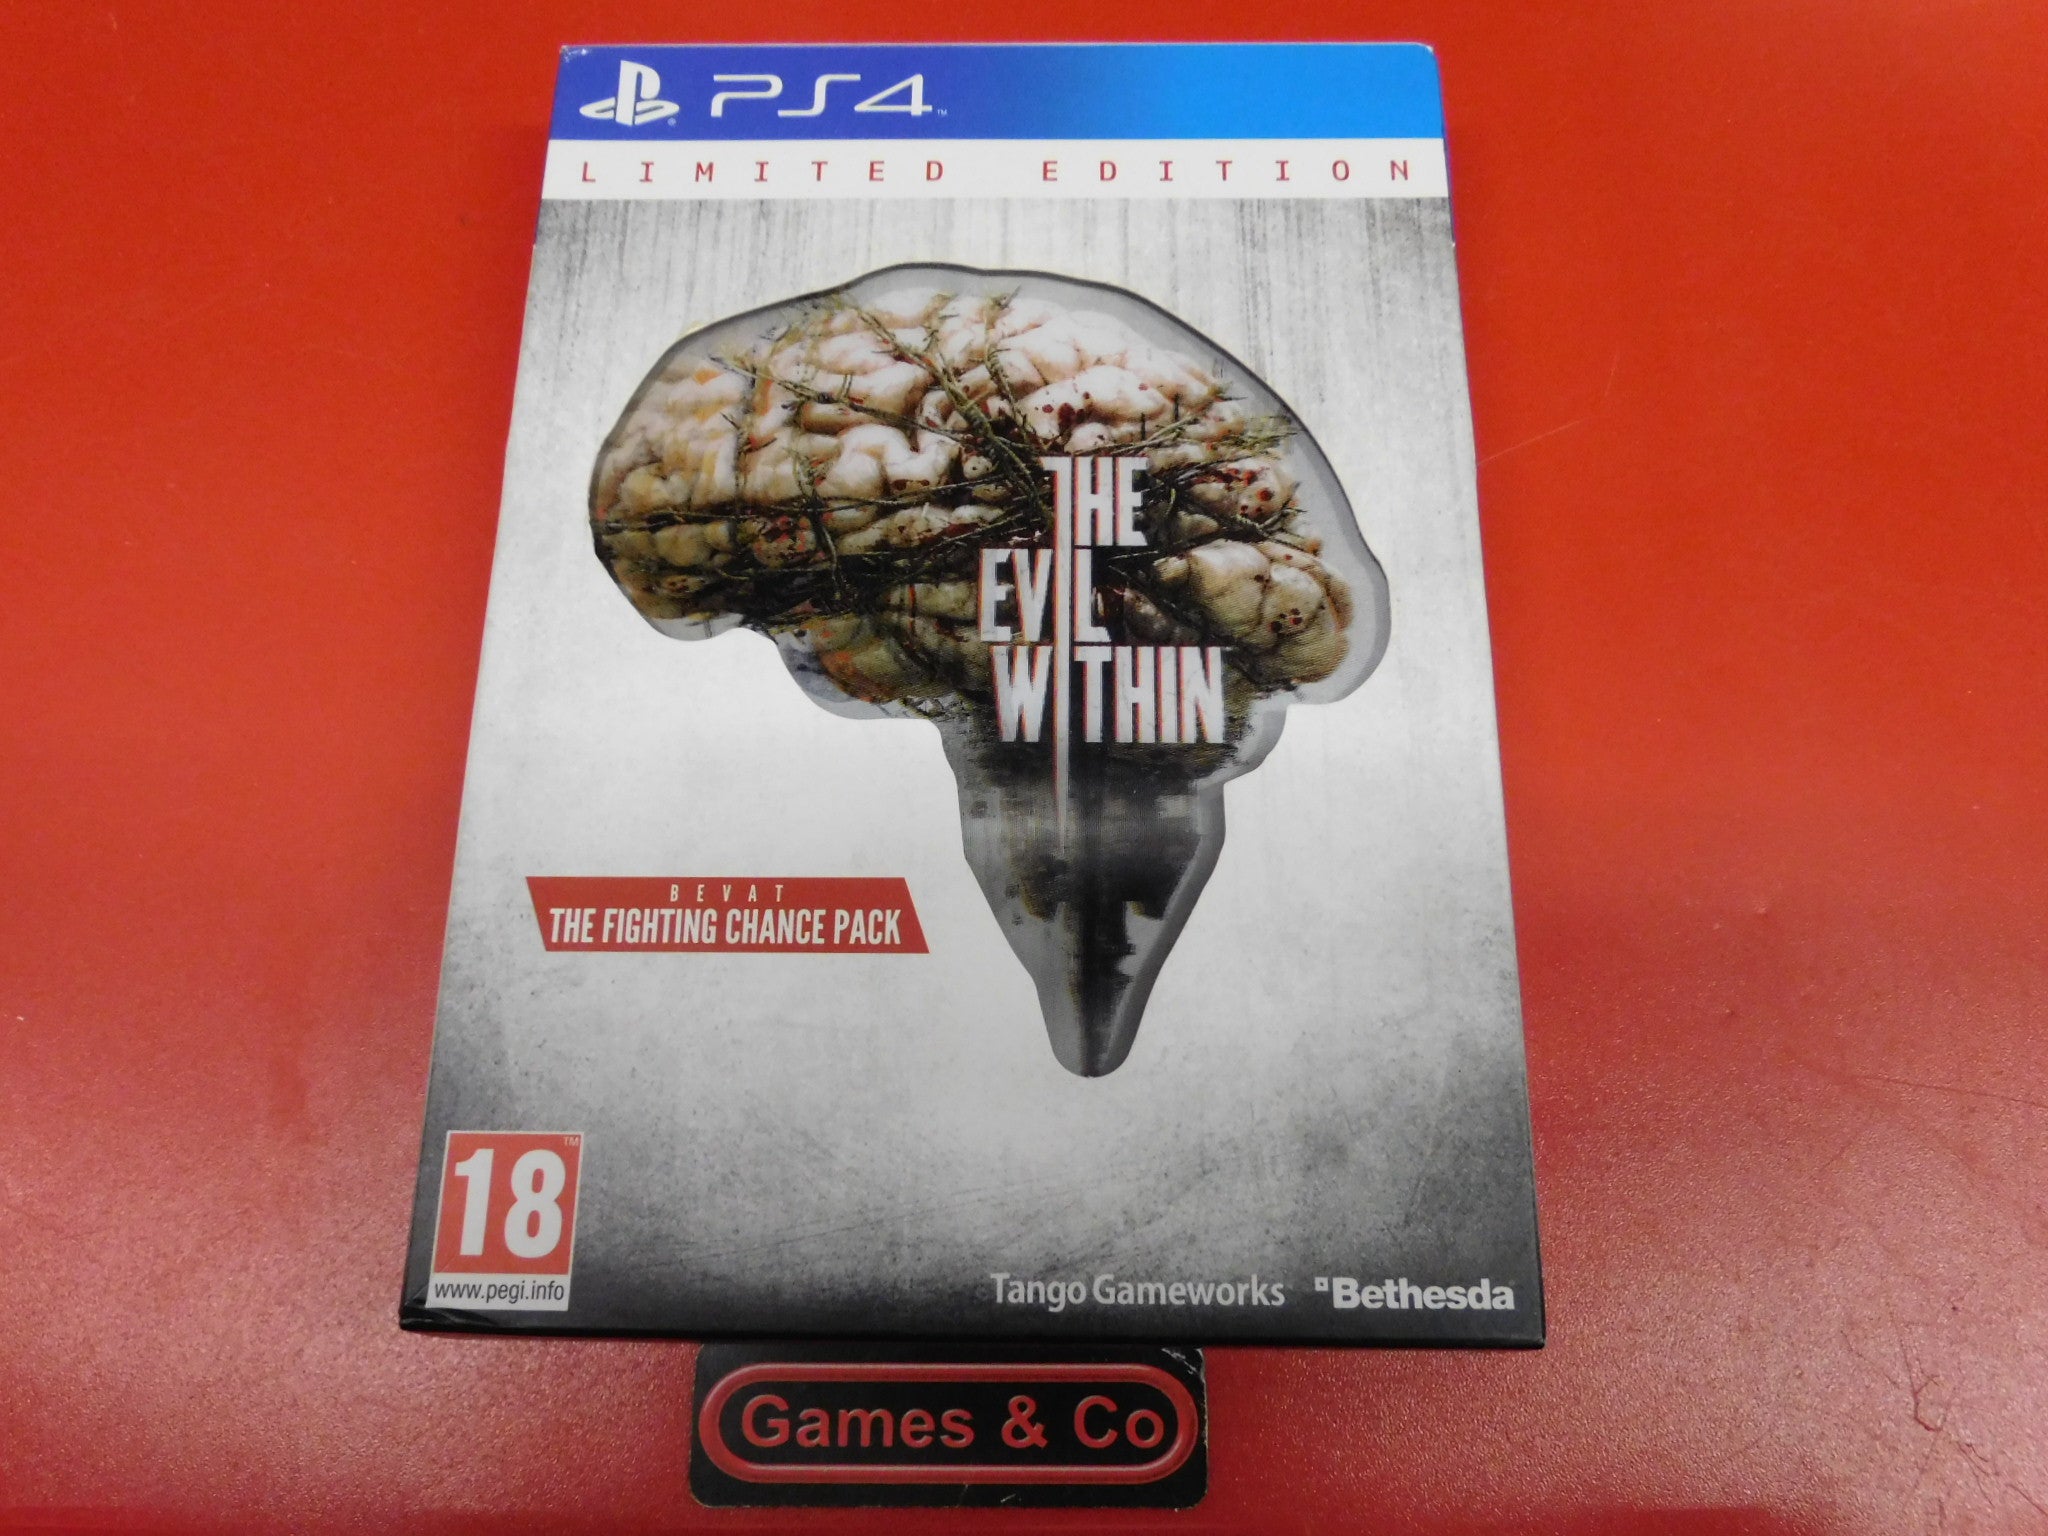 THE EVIL WITHIN LIMITED EDITION